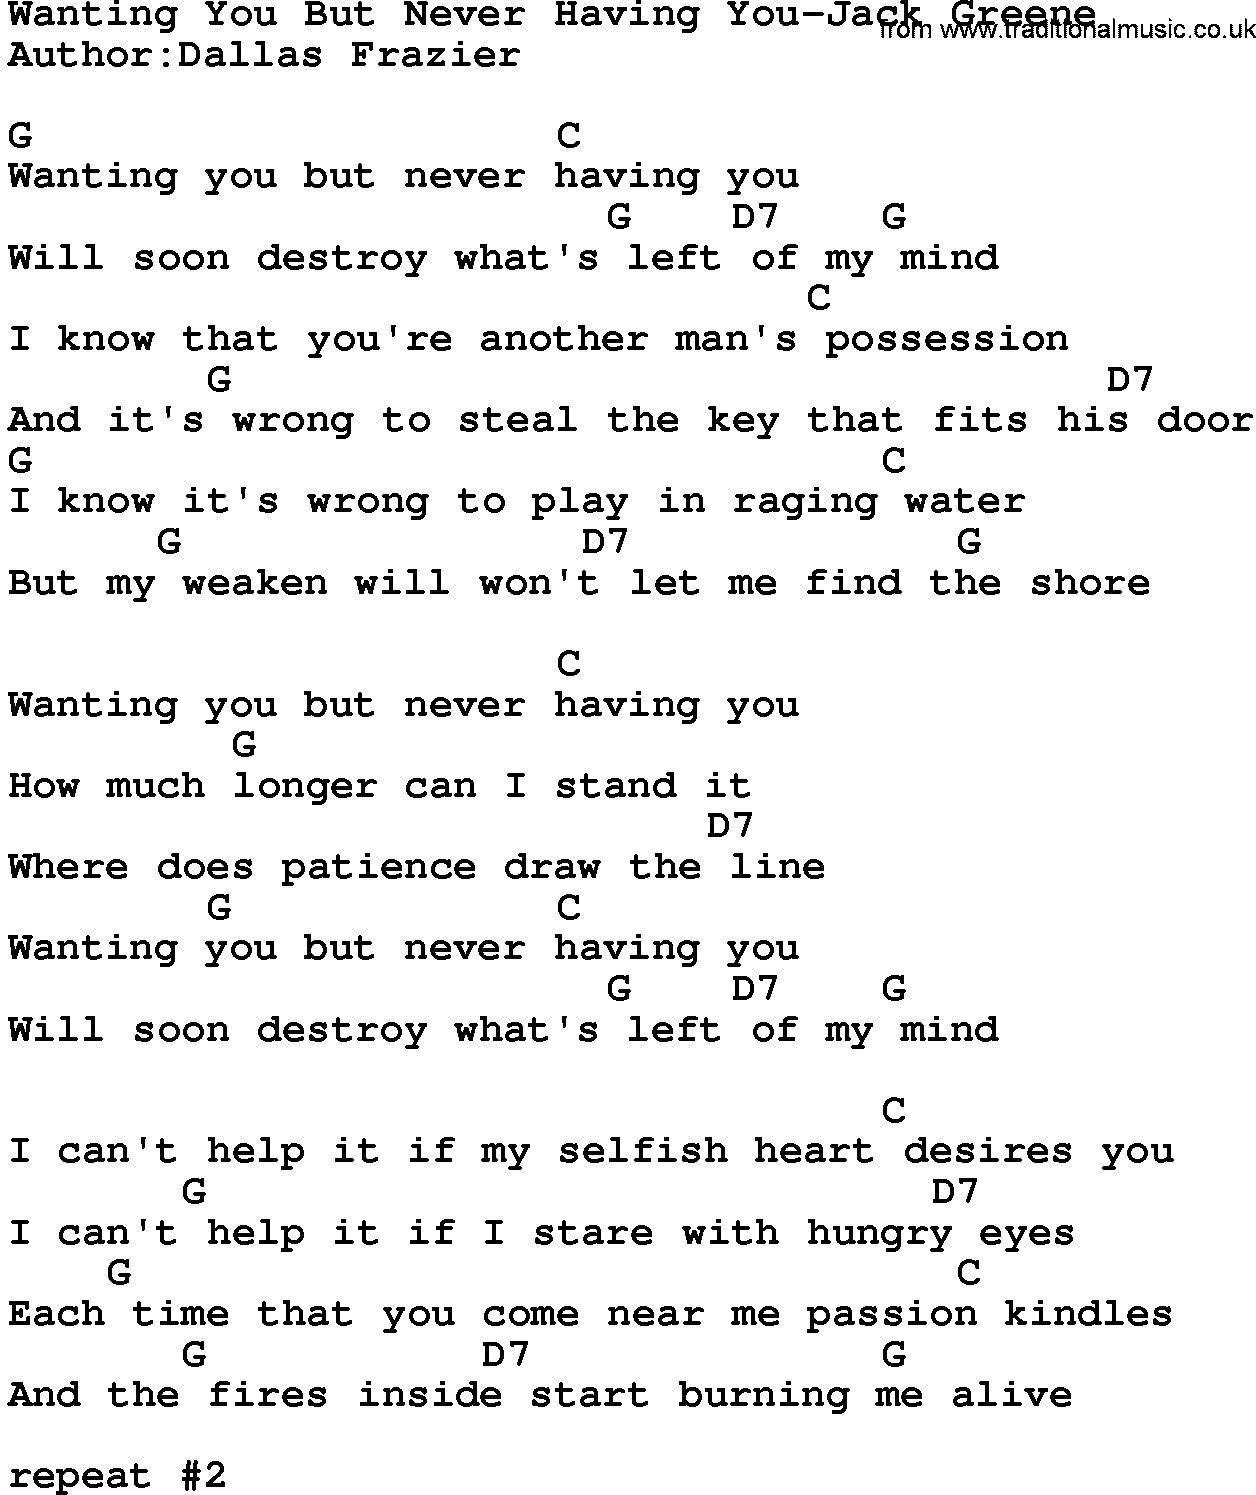 Country music song: Wanting You But Never Having You-Jack Greene lyrics and chords